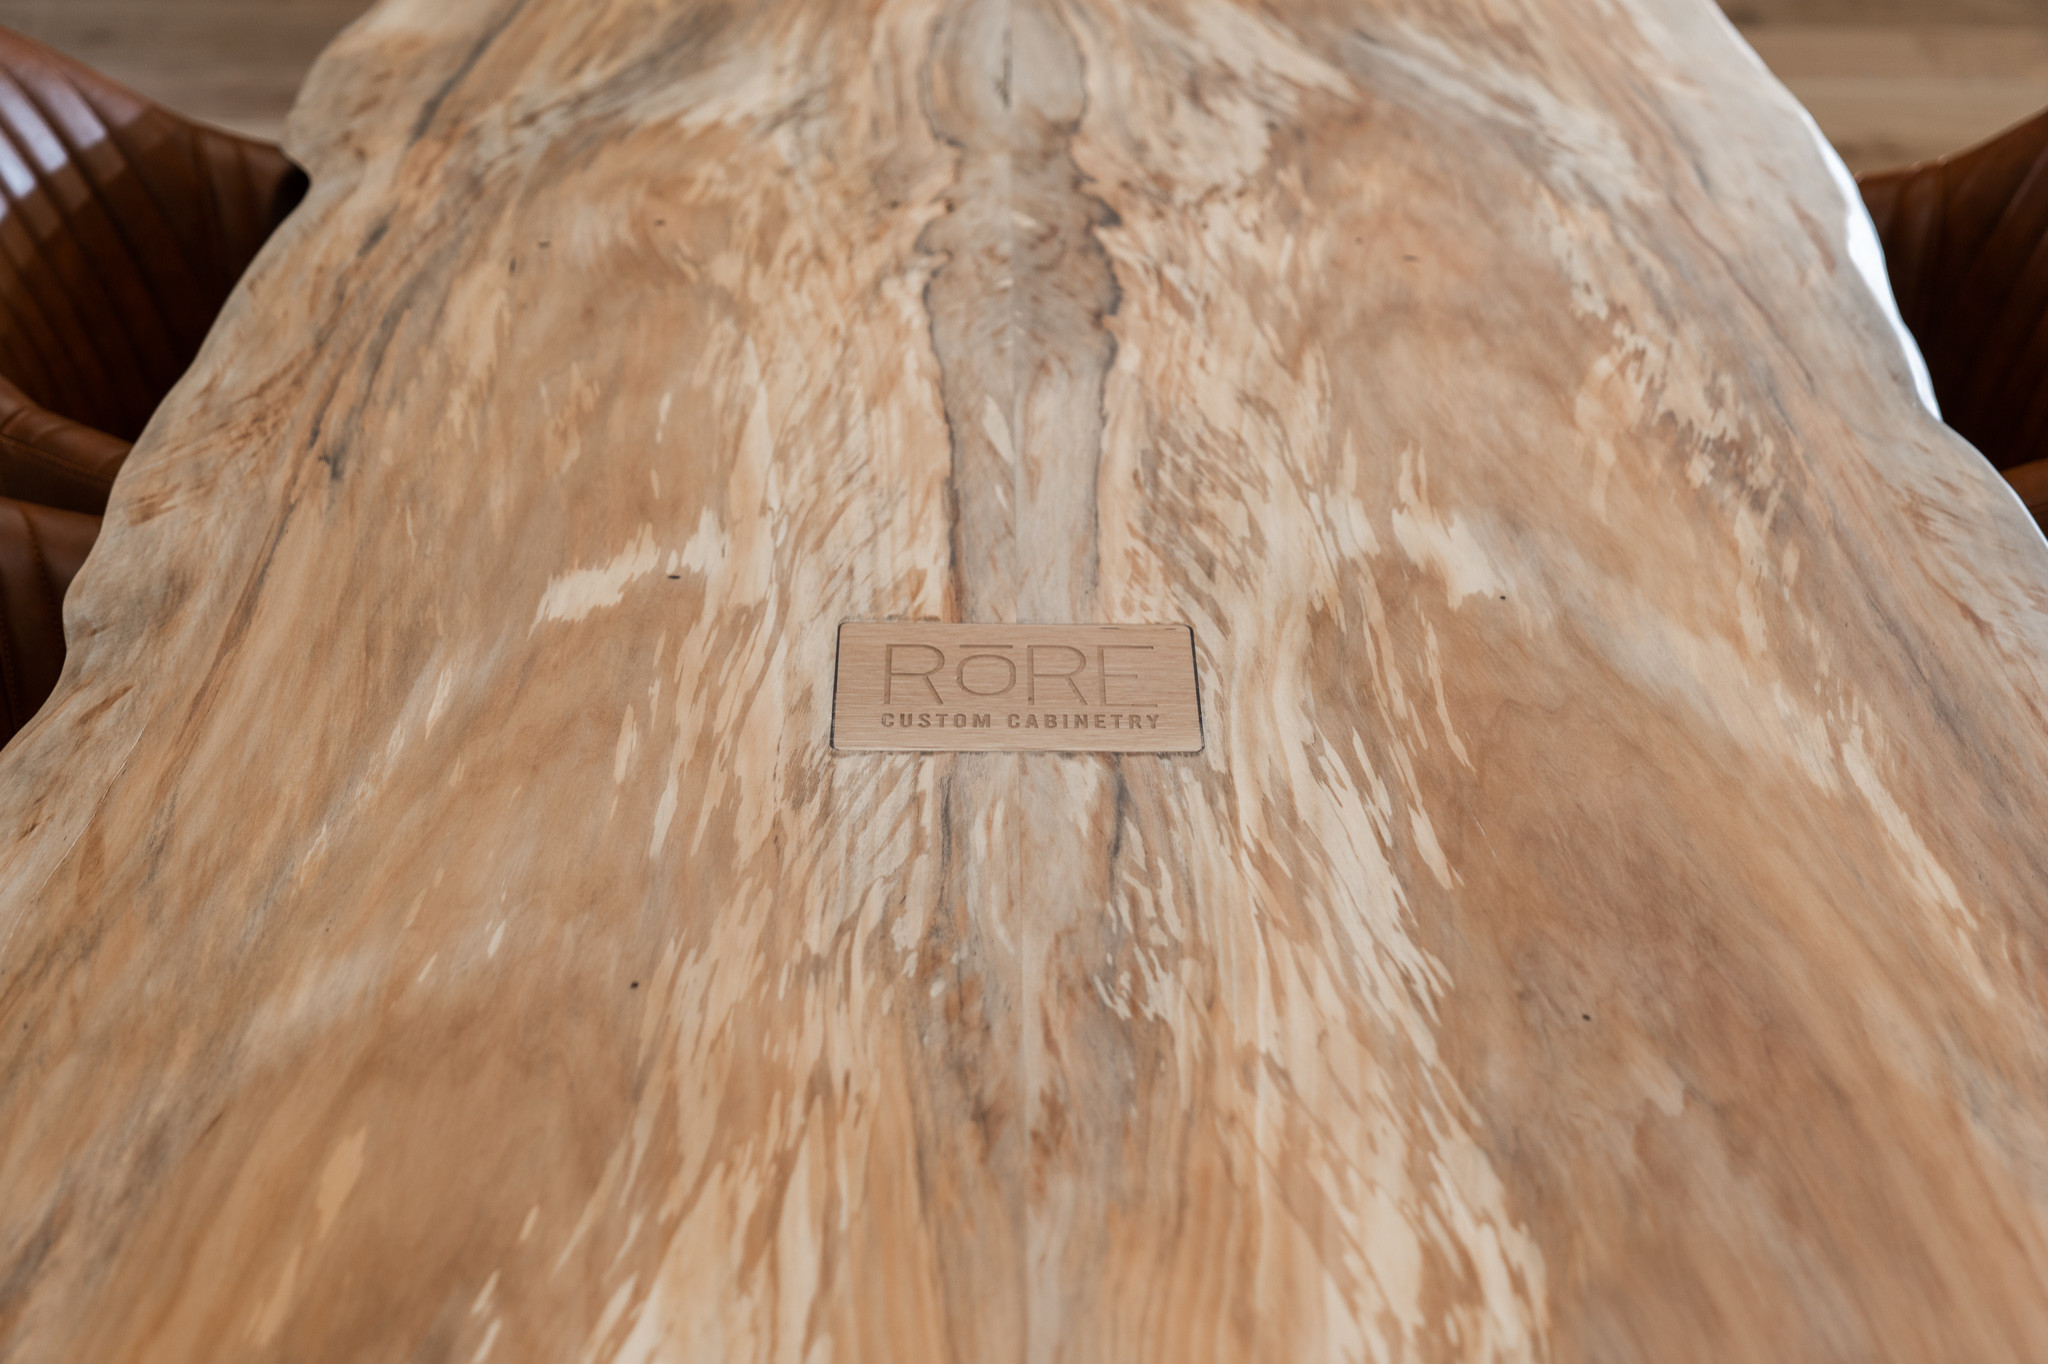 Rore Table Top